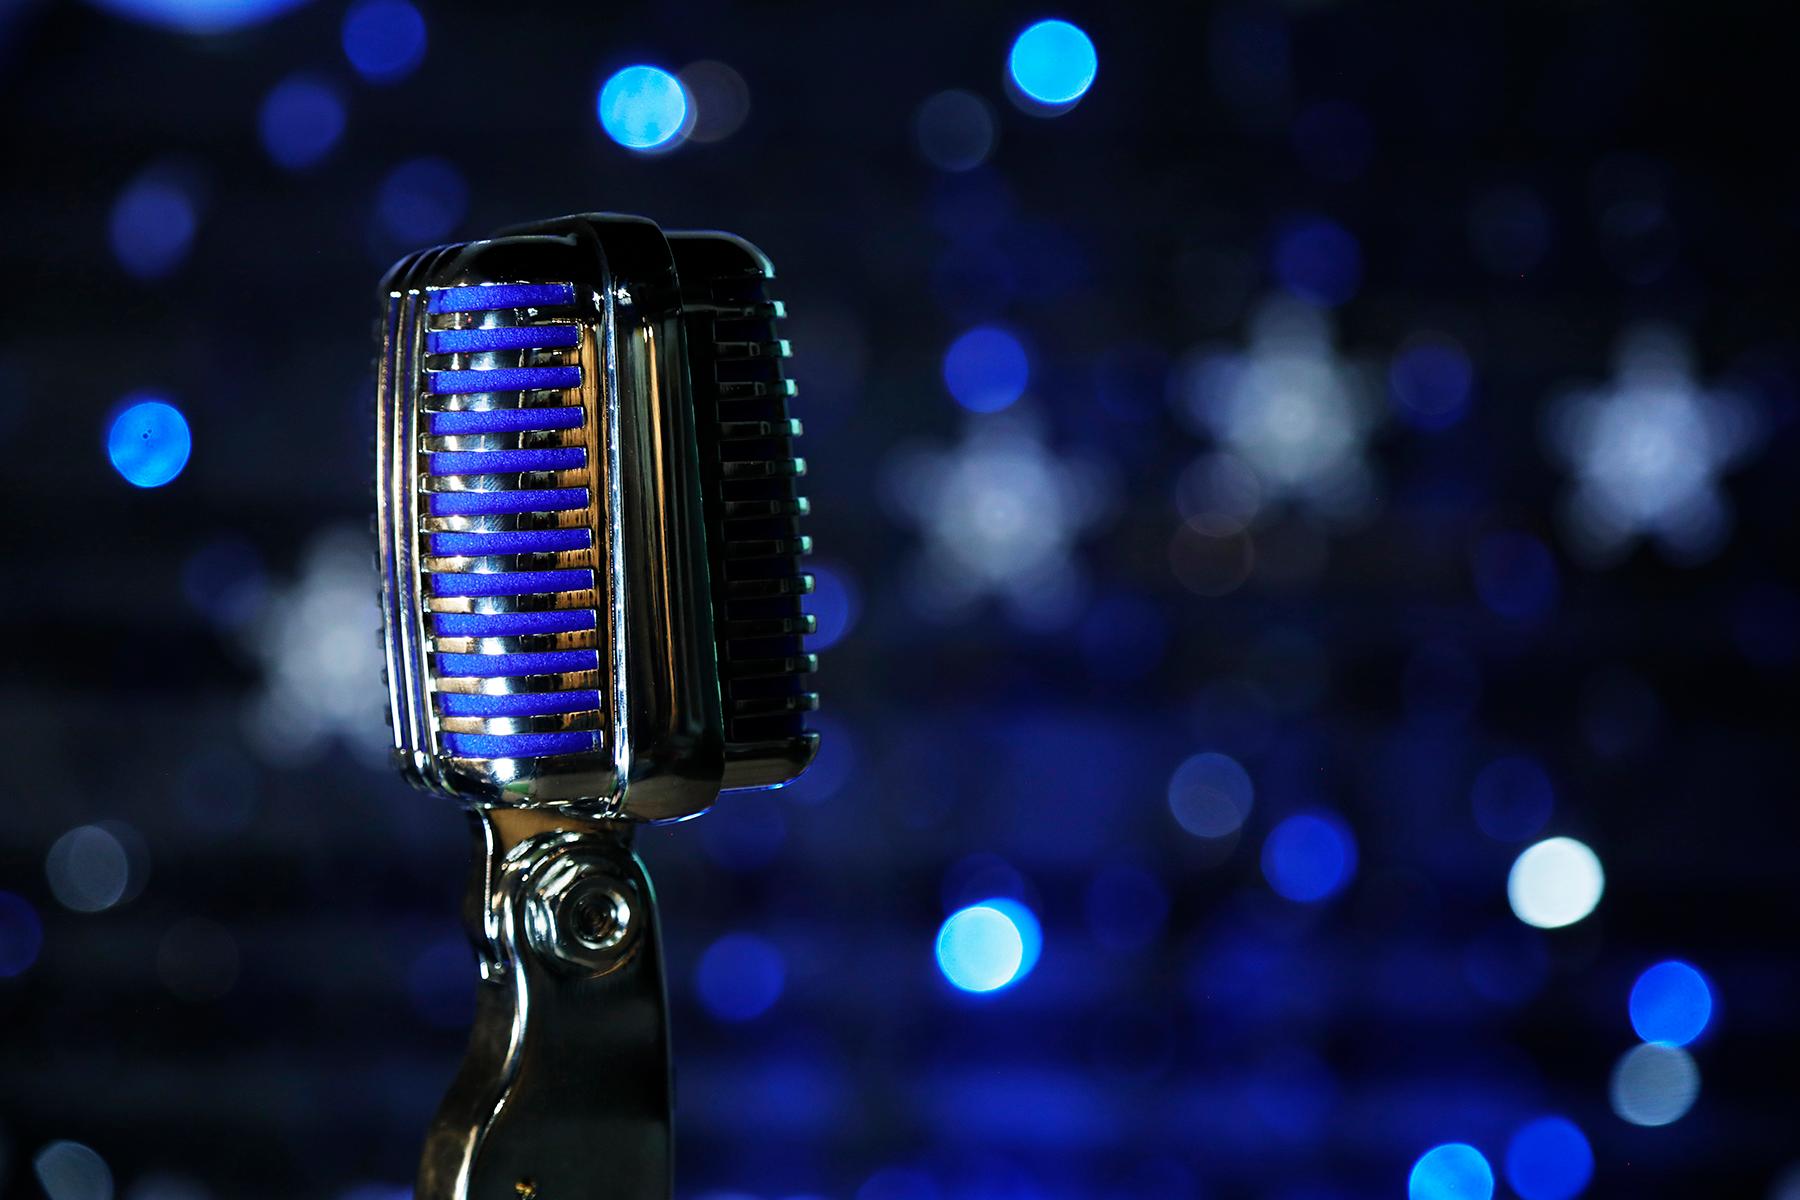 Microphone close up with sparkly blue background.